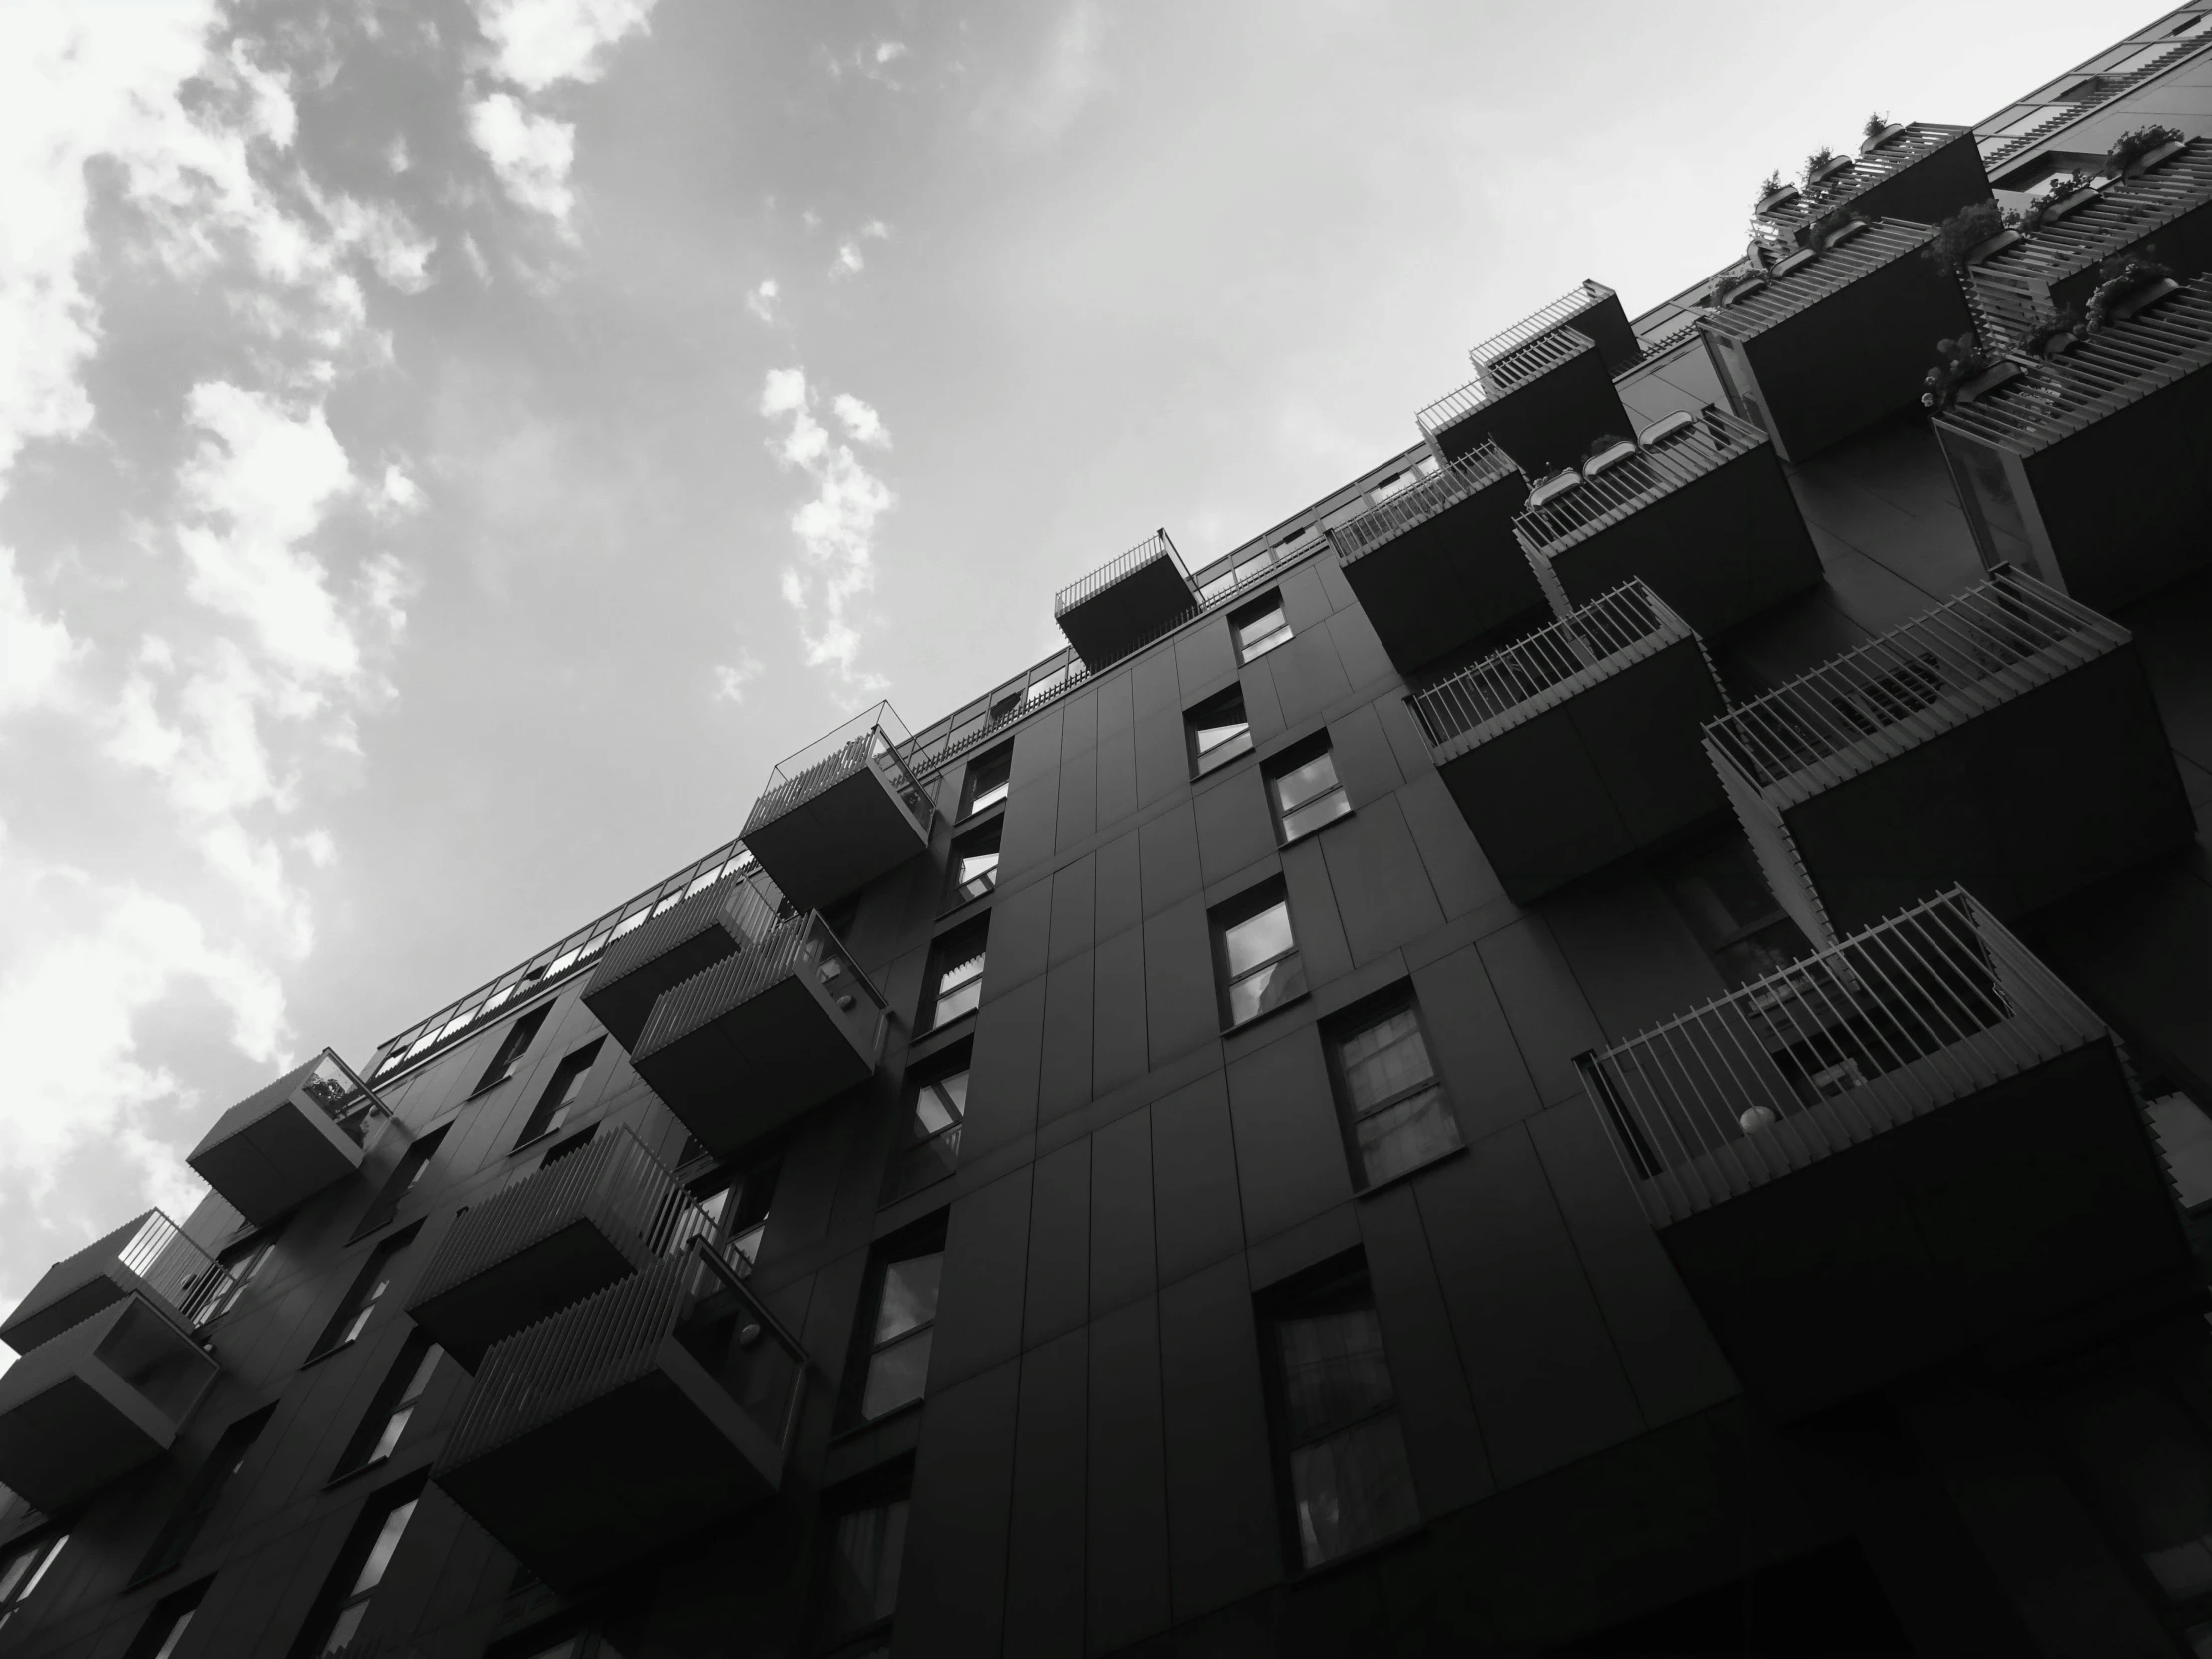 a black and white photo of a tall building, a black and white photo, unsplash, mass housing, modular, balcony, dramatic sky